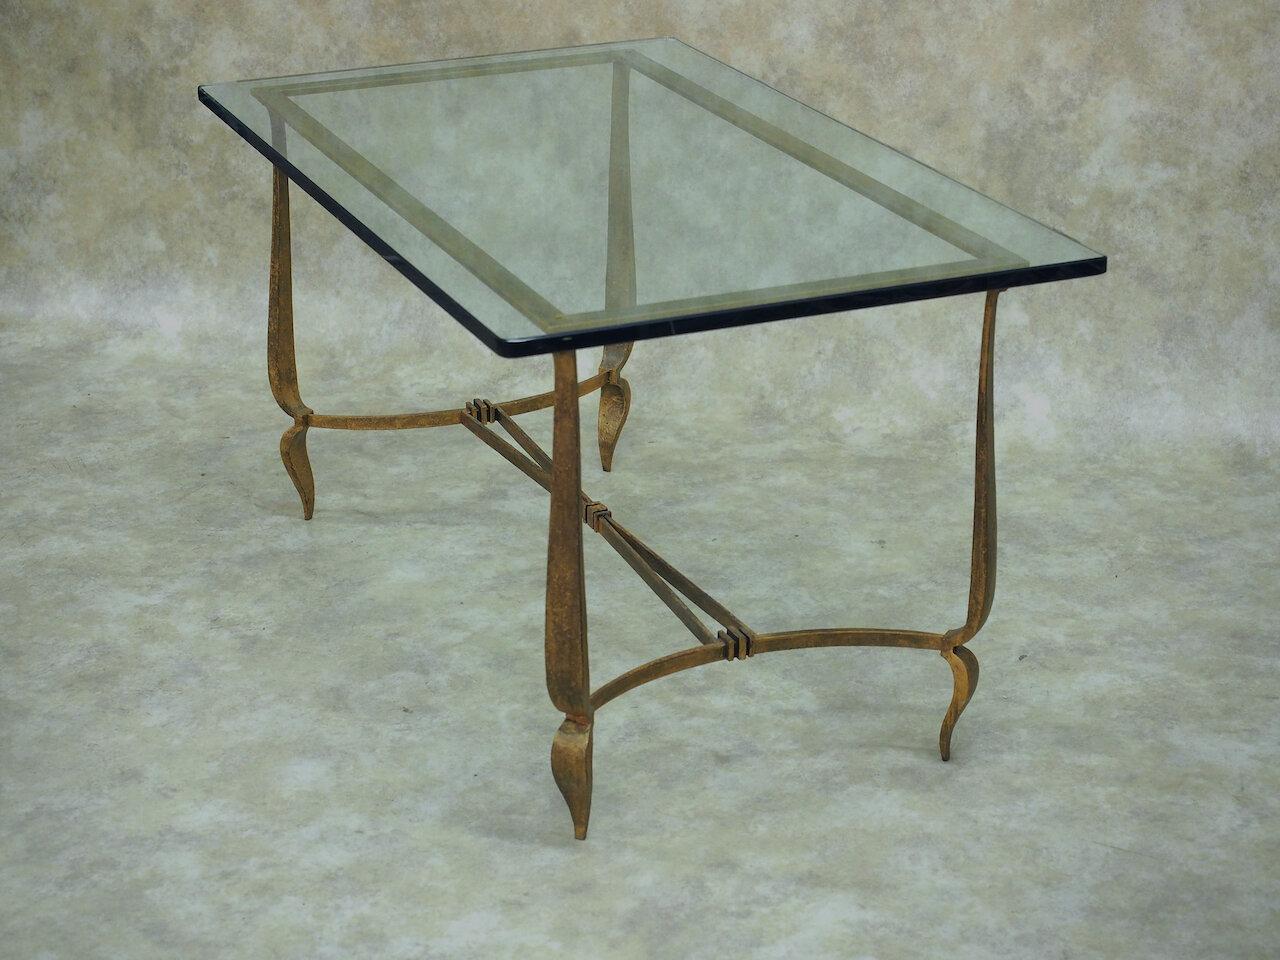 French Art Deco coffee table in gilt hand forged iron, by Rene Prou, circa 1930. 44” long x 26” wide x 23” high with glass. Frame: 41.5” long x 21” wide.

Rene Prou

(1889-1948)

A decorator as well as furniture designer, Rene Prou was born in